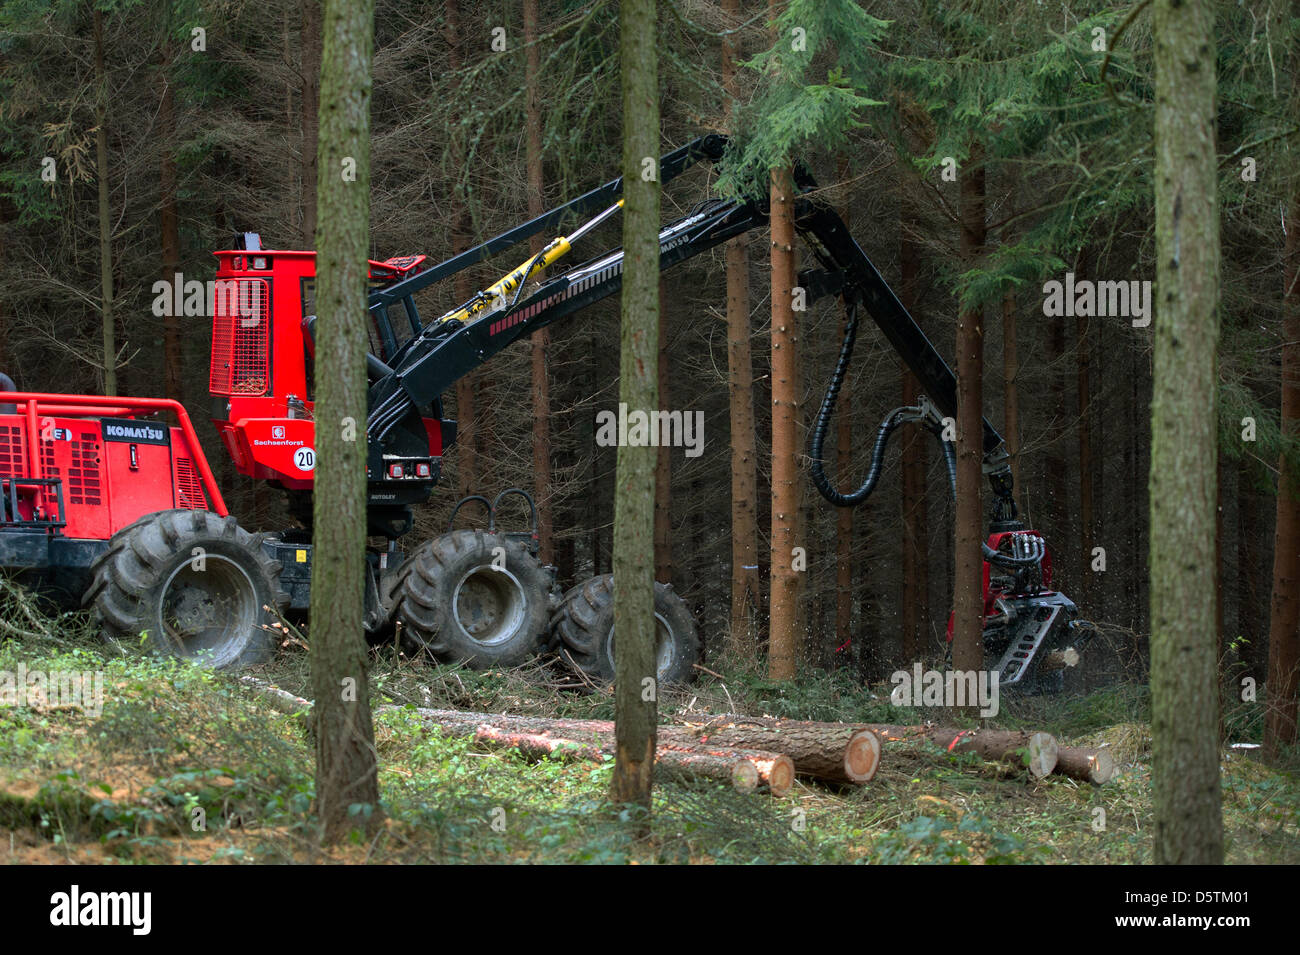 A harvester, a special logging vehichle for felling, delimbing and bucking trees, cuts down a spruce during the timber harvest by the Saxon State Forestry Service in the Unger forest district near Neustadt, Germany, 26 November 2012. Around 1.5 hectares and 10 percent of the area of the forest district will be thinned according to plan. Almost 80,000 cubic meters of wood with a val Stock Photo